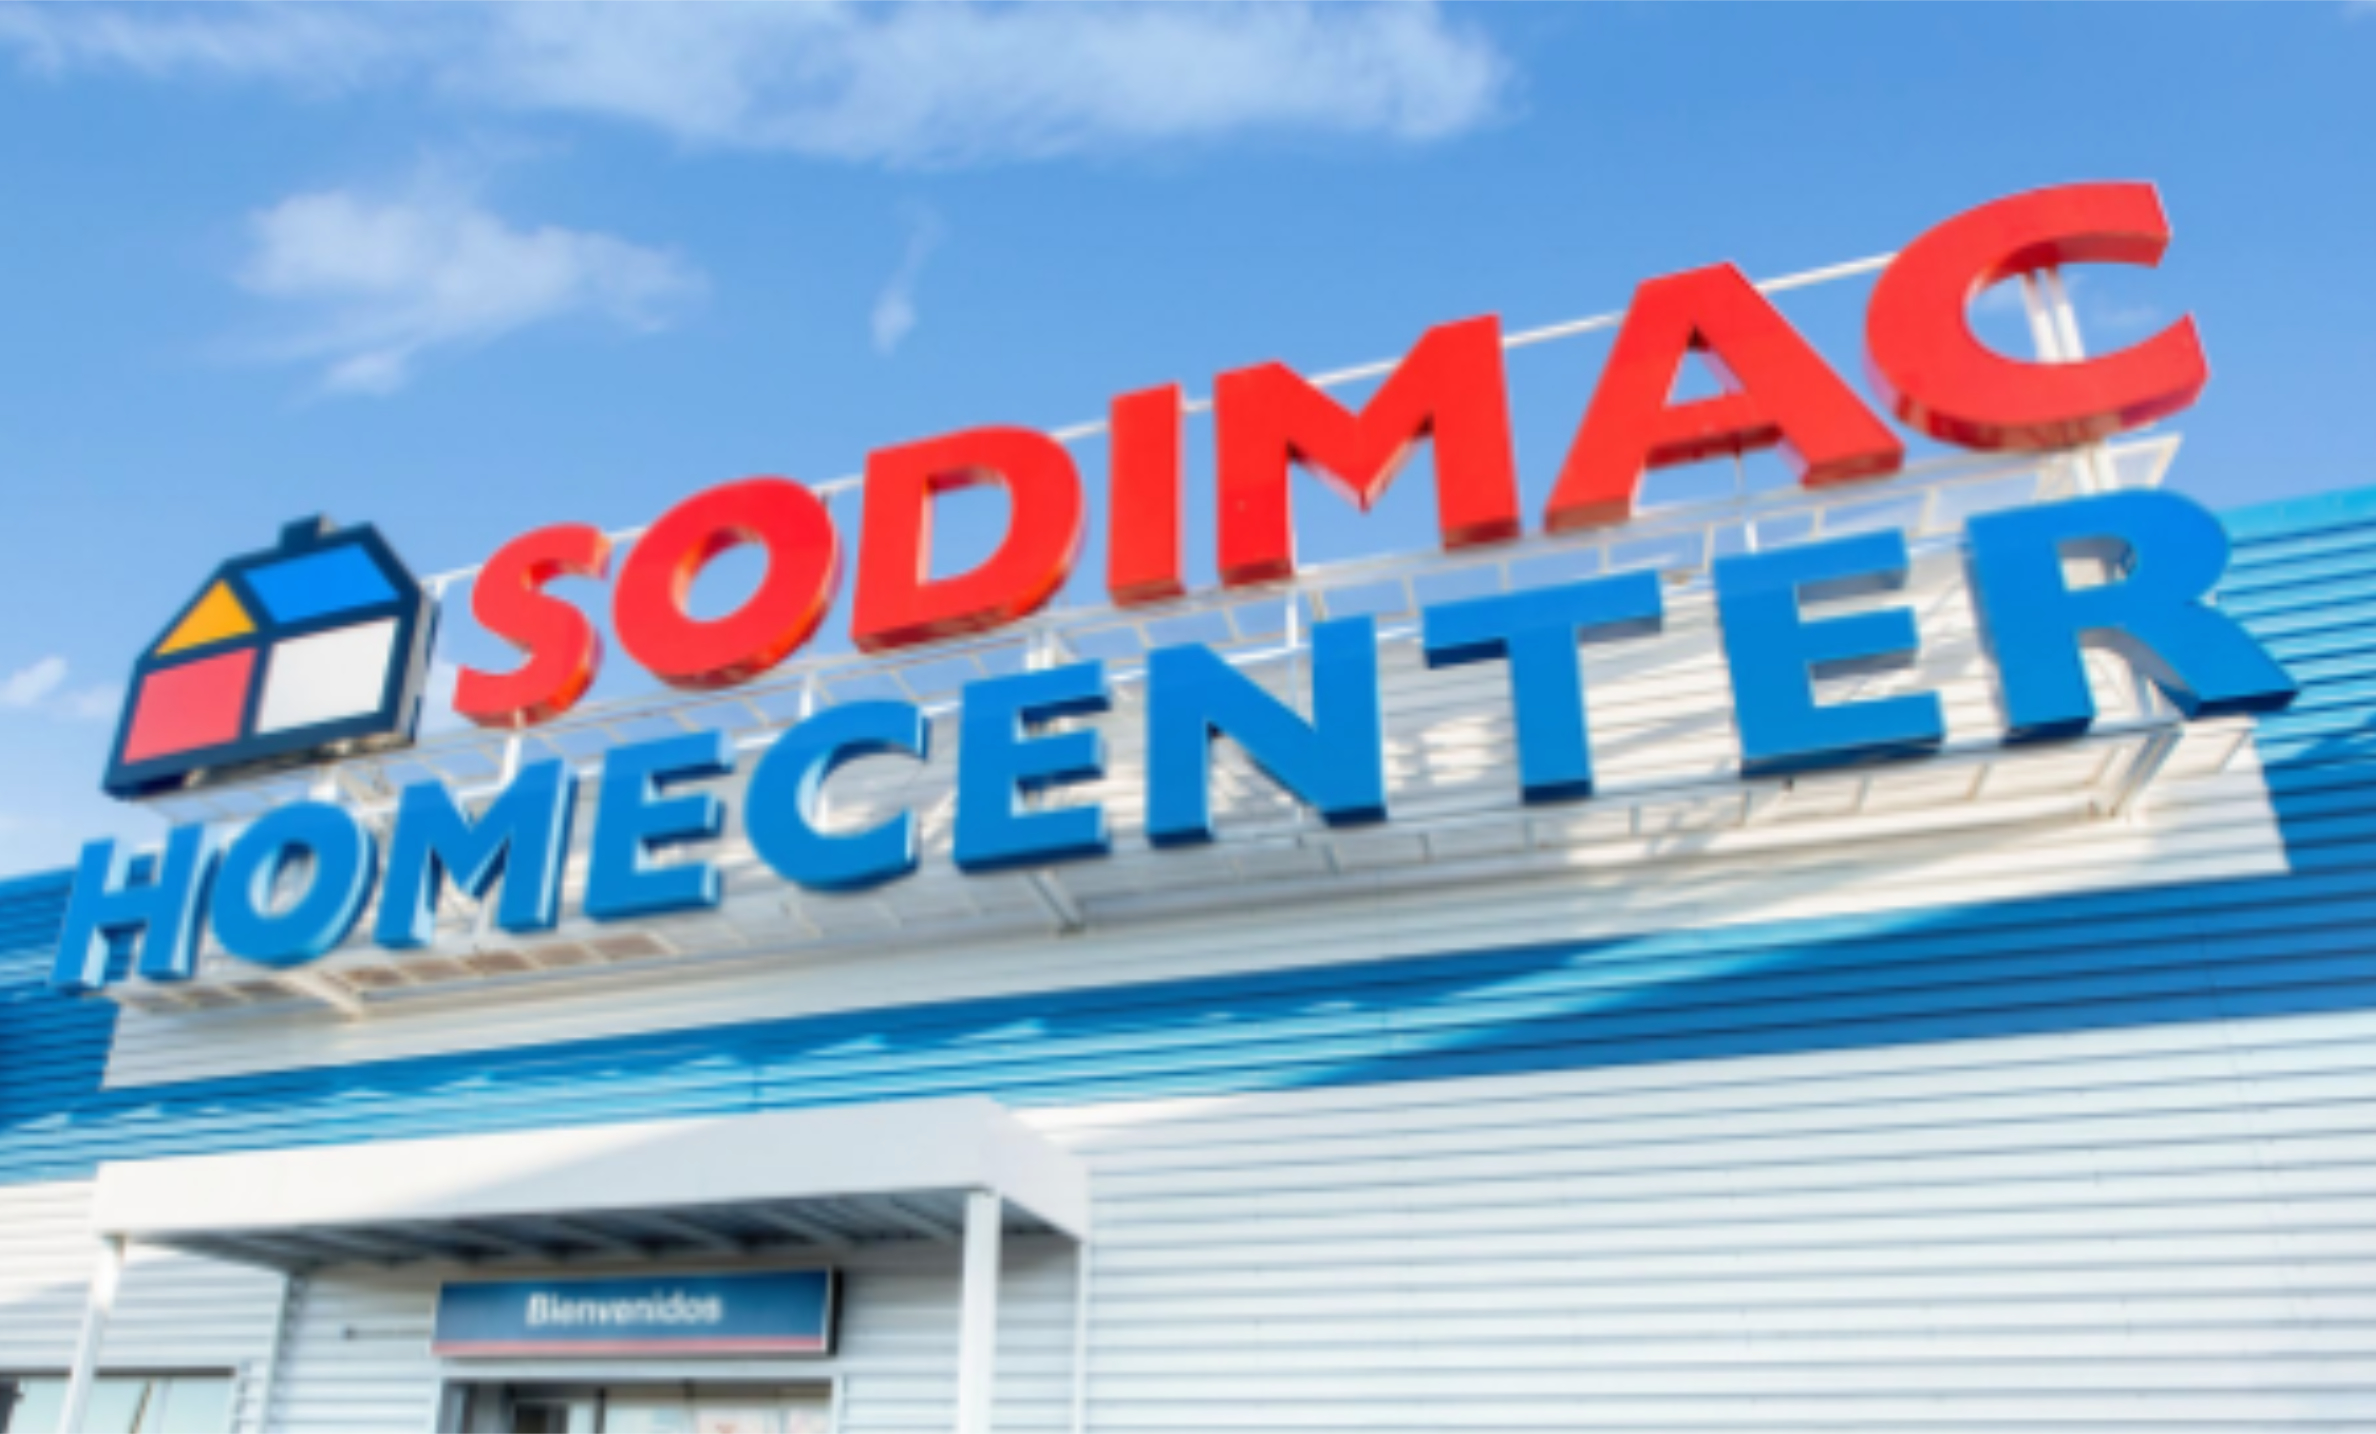 Sodimac selected commercetools to accelerate its digital transformation